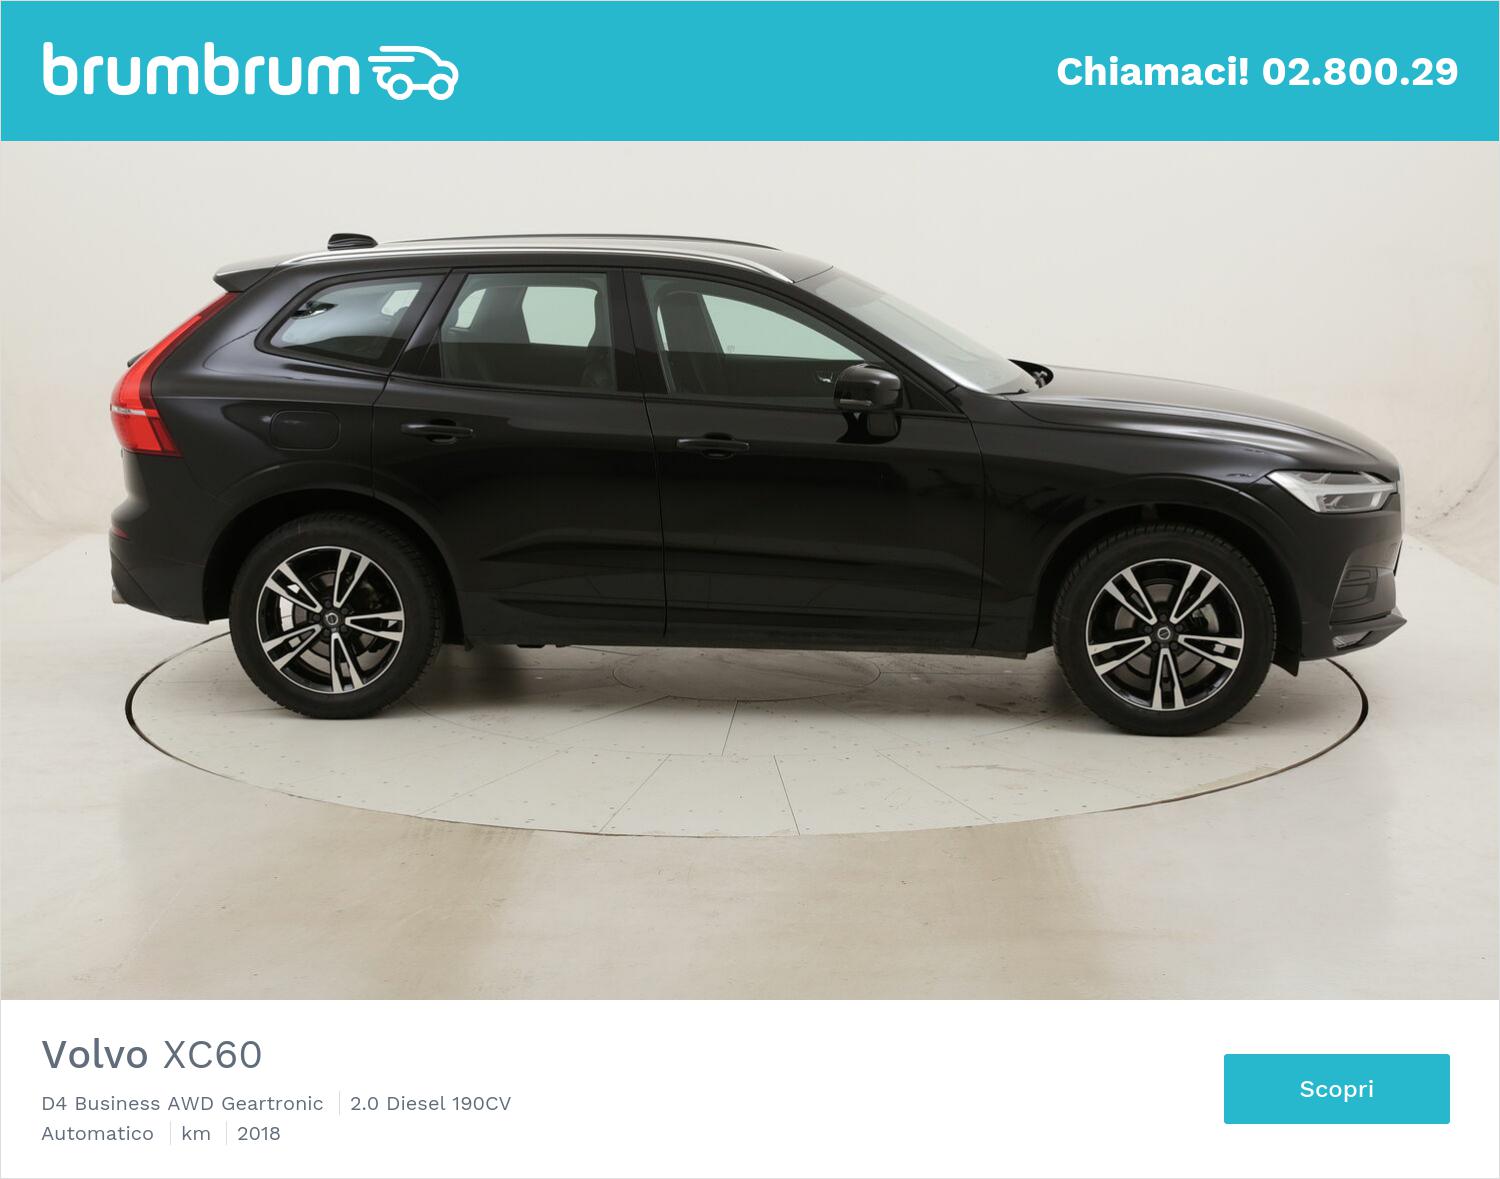 Volvo XC60 D4 Business AWD Geartronic usata del 2018 con 19.840 km | brumbrum